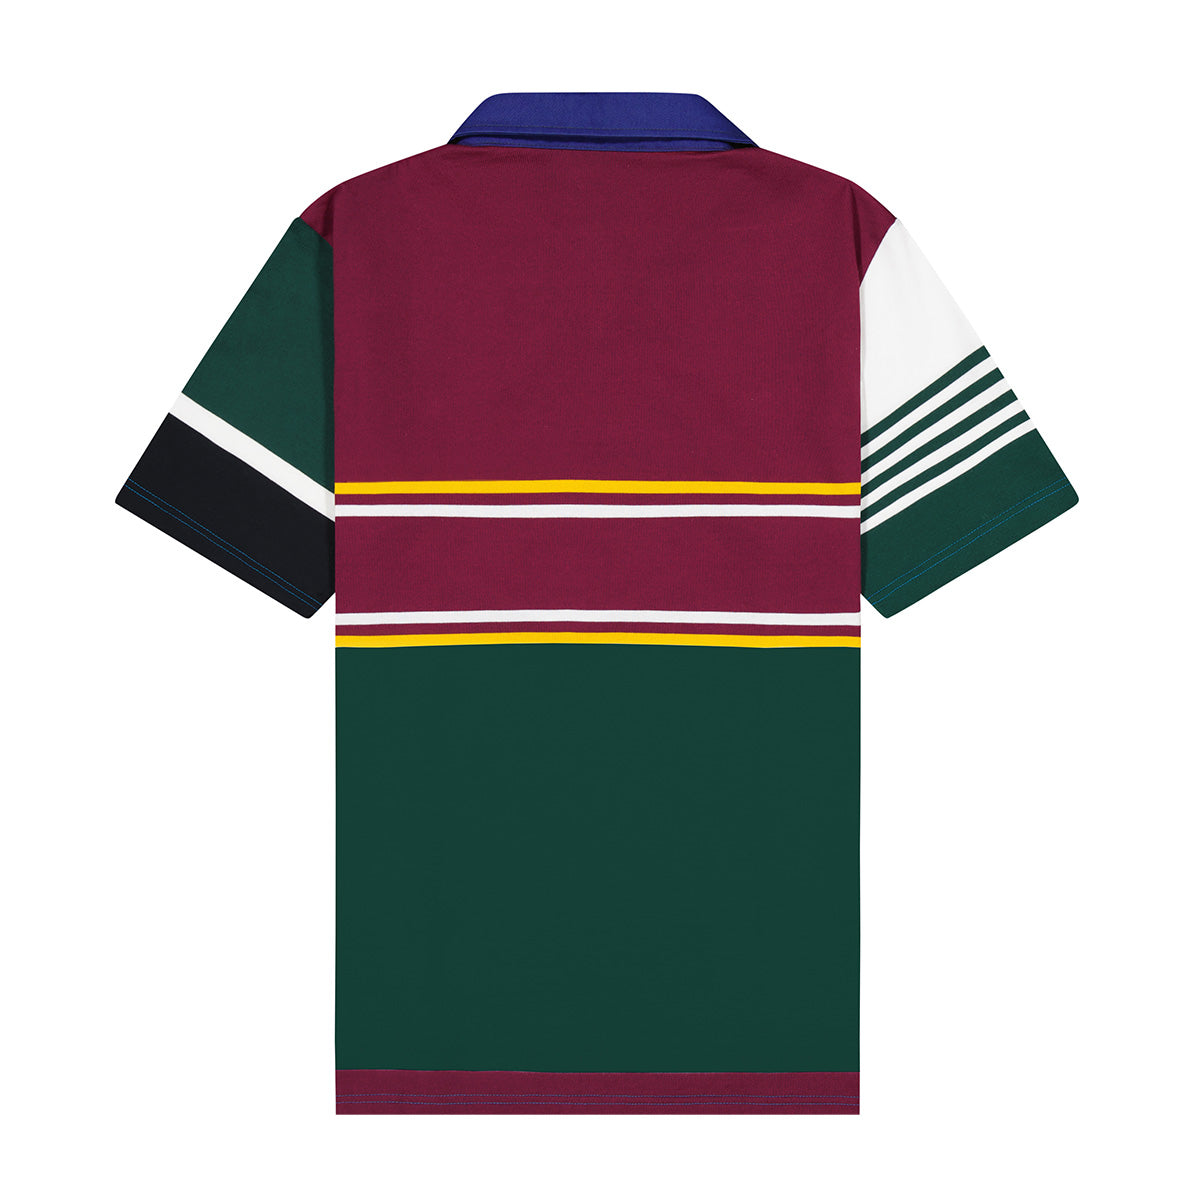 All Sorts Polycotton Jersey - Short Sleeve + Free Rugby Shorts & Rugby Socks